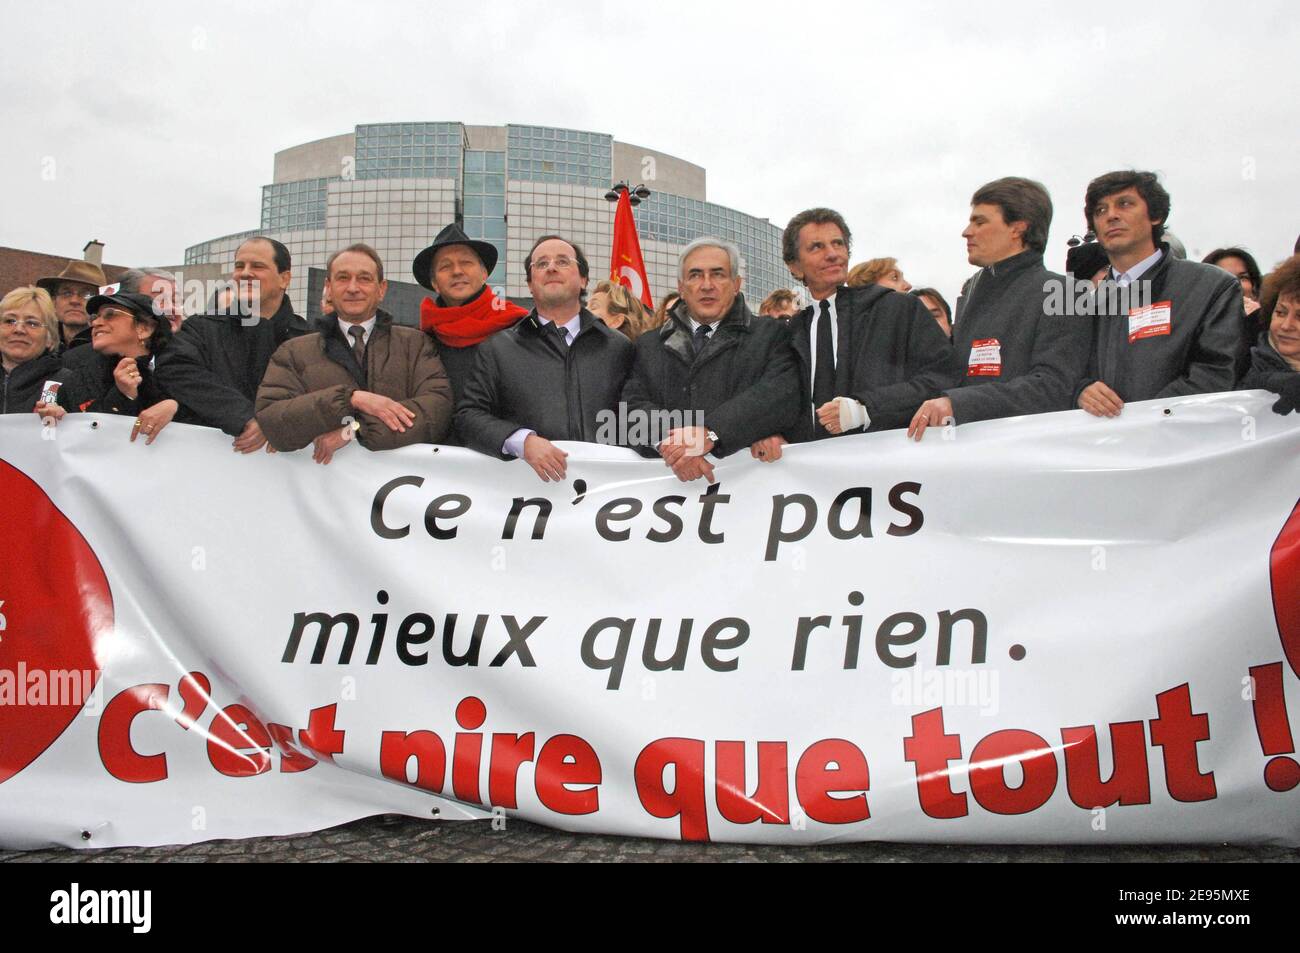 Striking French student and teachers protest with union banners as they demonstrate to demand 'CPE' work contract remove in Paris, France, on February 7, 2006. Trade union federations called for workers and students in France to strike and stage protest marches to demand the suppression of the new work contract reserved for first job called 'CPE'. Pictured here are (l to r) Paris'Mayor Bertrand Delanoe, former Prime minister Laurent Fabius, General Secretary of the French Socialist Party Francois Hollande, Dominique Strauss-Kahn and Jack Lang, former ministers and key members of French Sociali Stock Photo